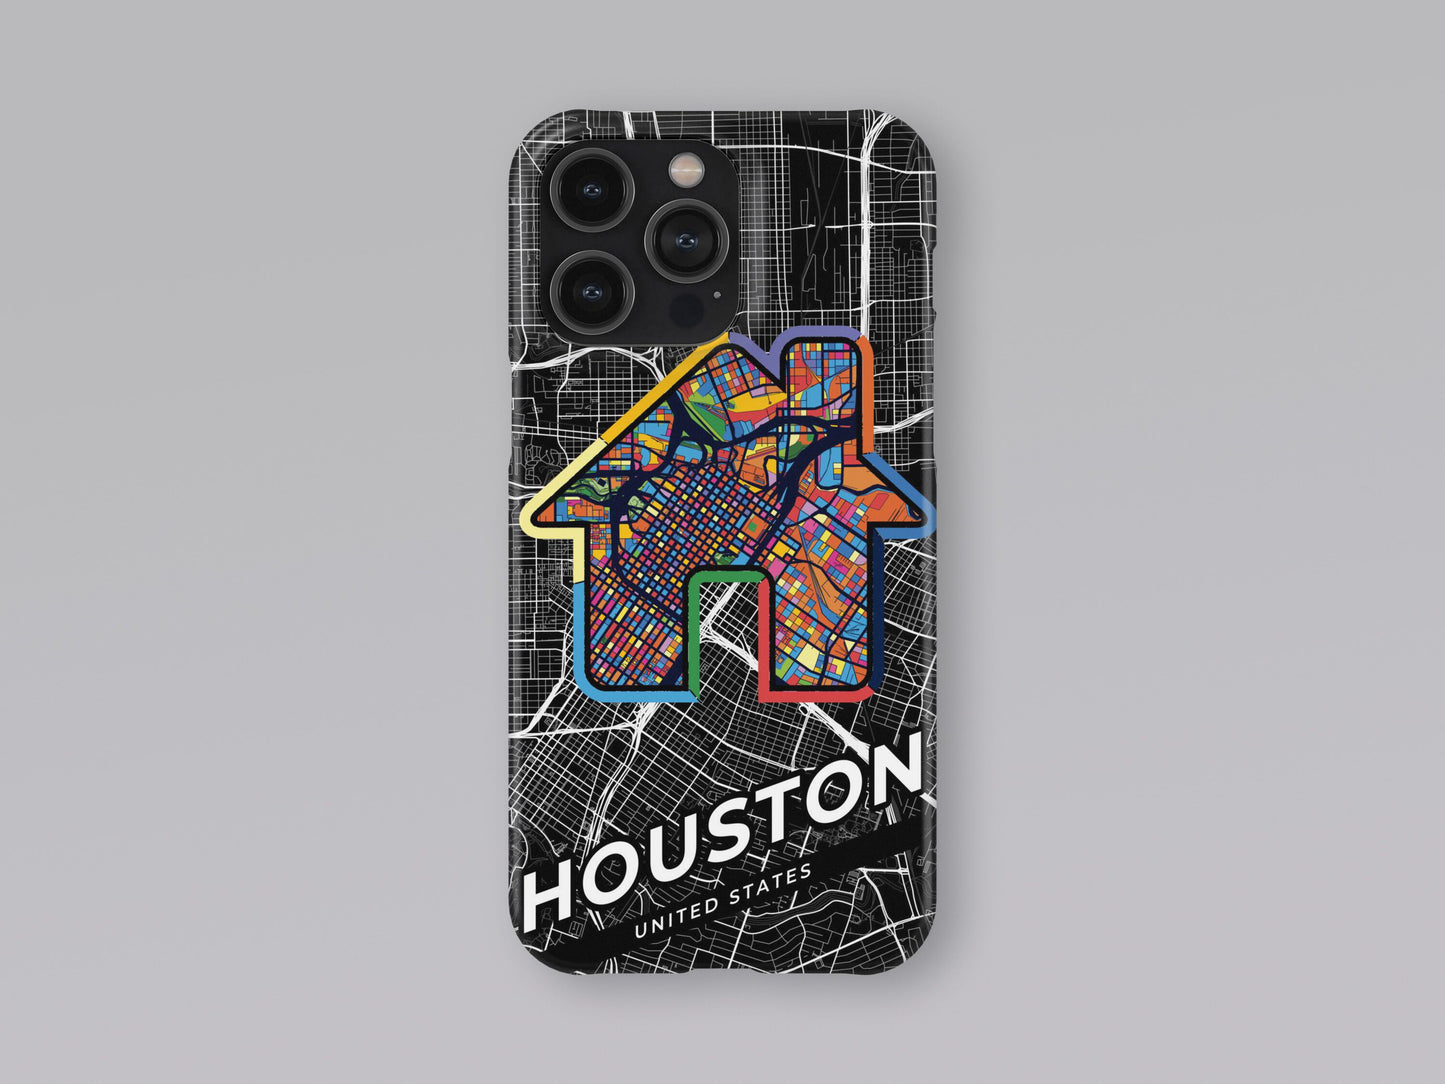 Houston Texas slim phone case with colorful icon. Birthday, wedding or housewarming gift. Couple match cases. 3